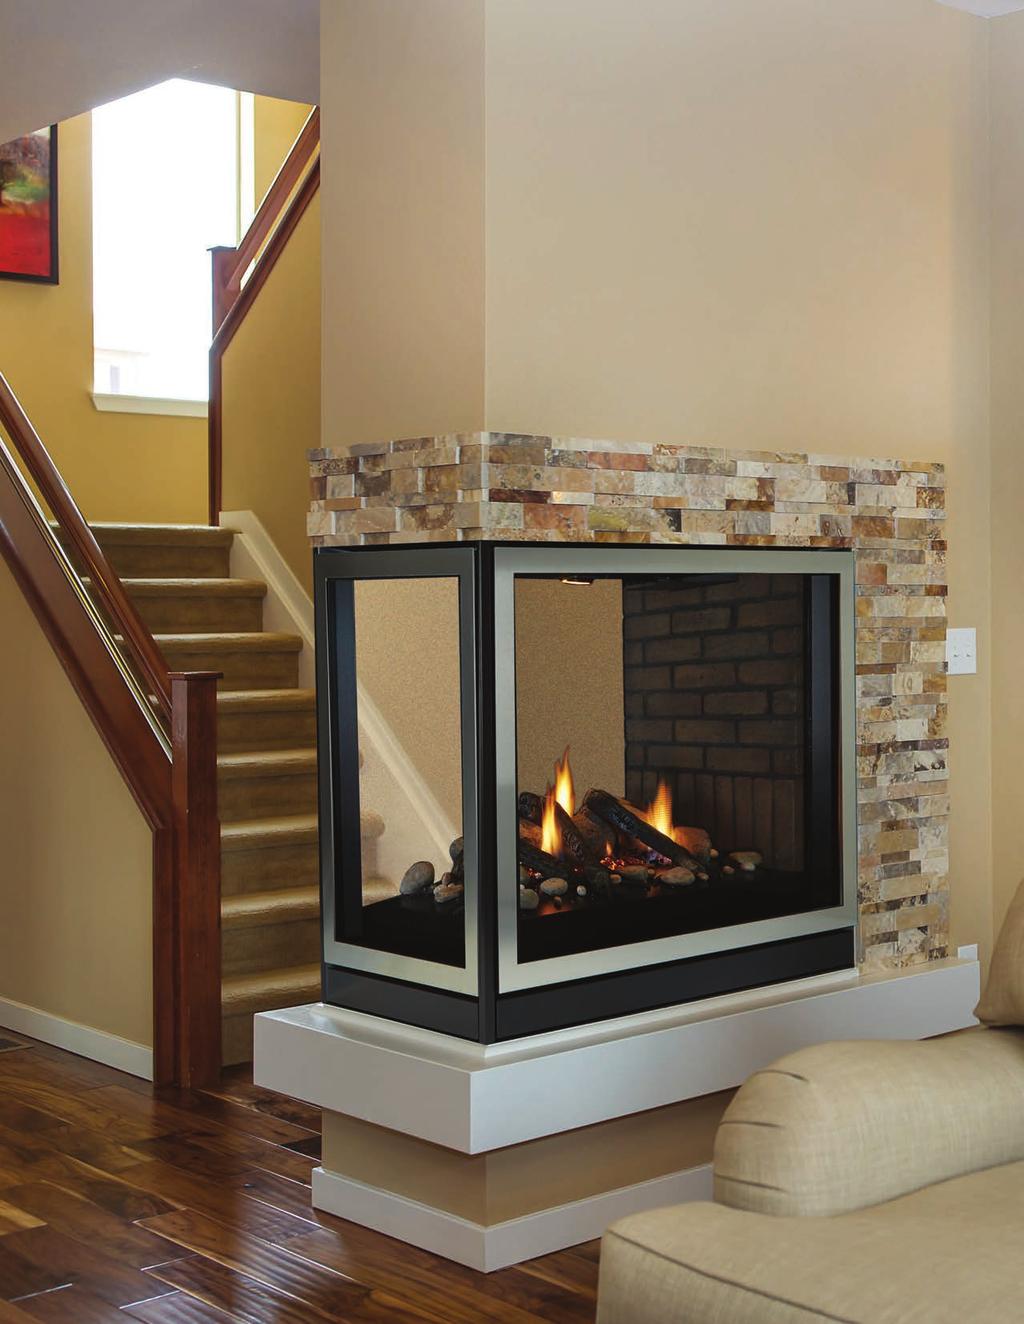 Direct-ent Premium Peninsula Direct-ent Premium Peninsula Fireplace, ottage rick Liner with Soldier ourse, Mixed